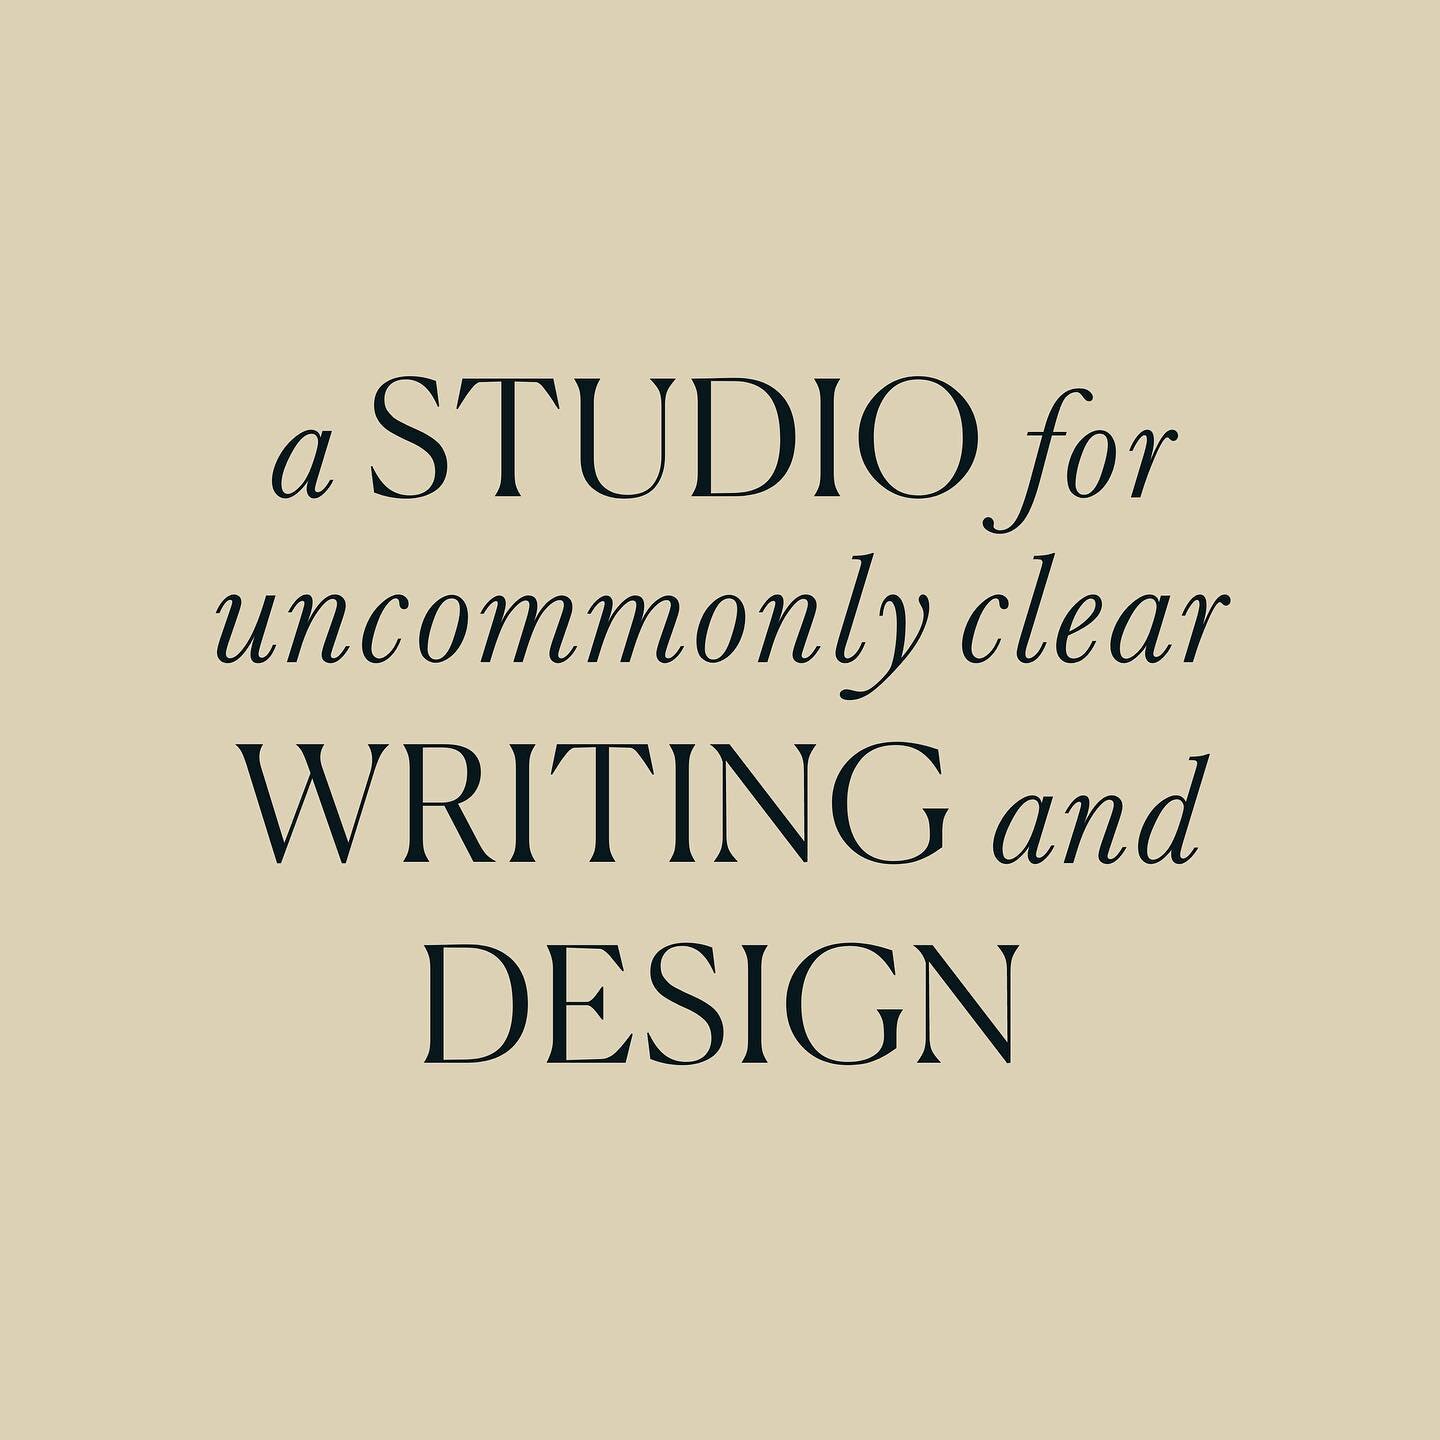 New brand, who dis? 👋
We&rsquo;re a studio for uncommonly clear writing and design. Nice to meet you!